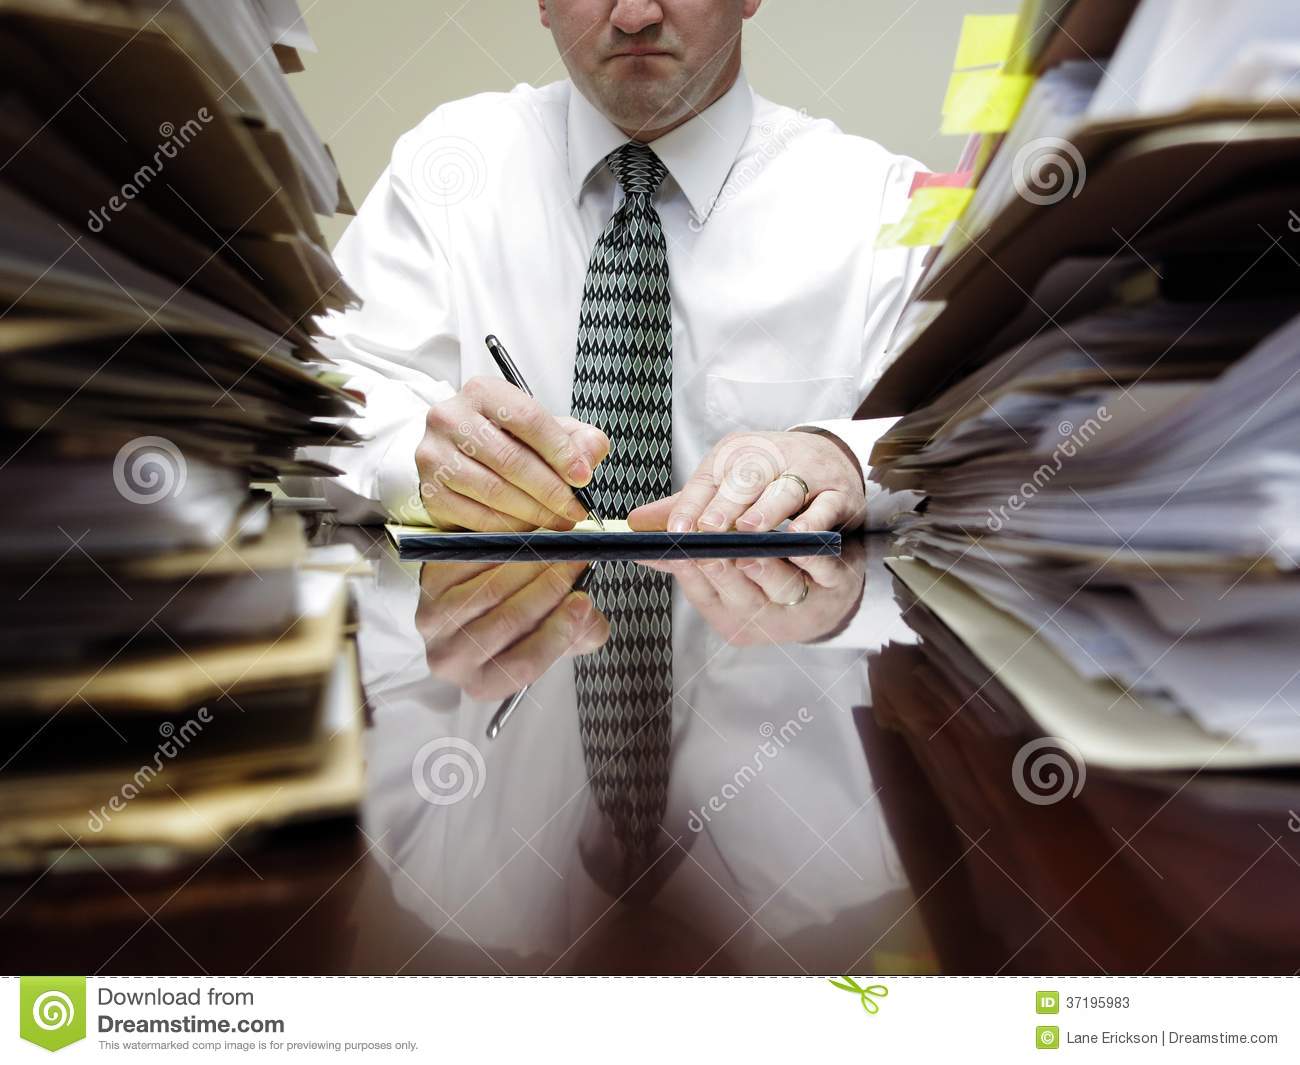 Businessman At Desk With Piles Of Files Stock Photos   Image  37195983